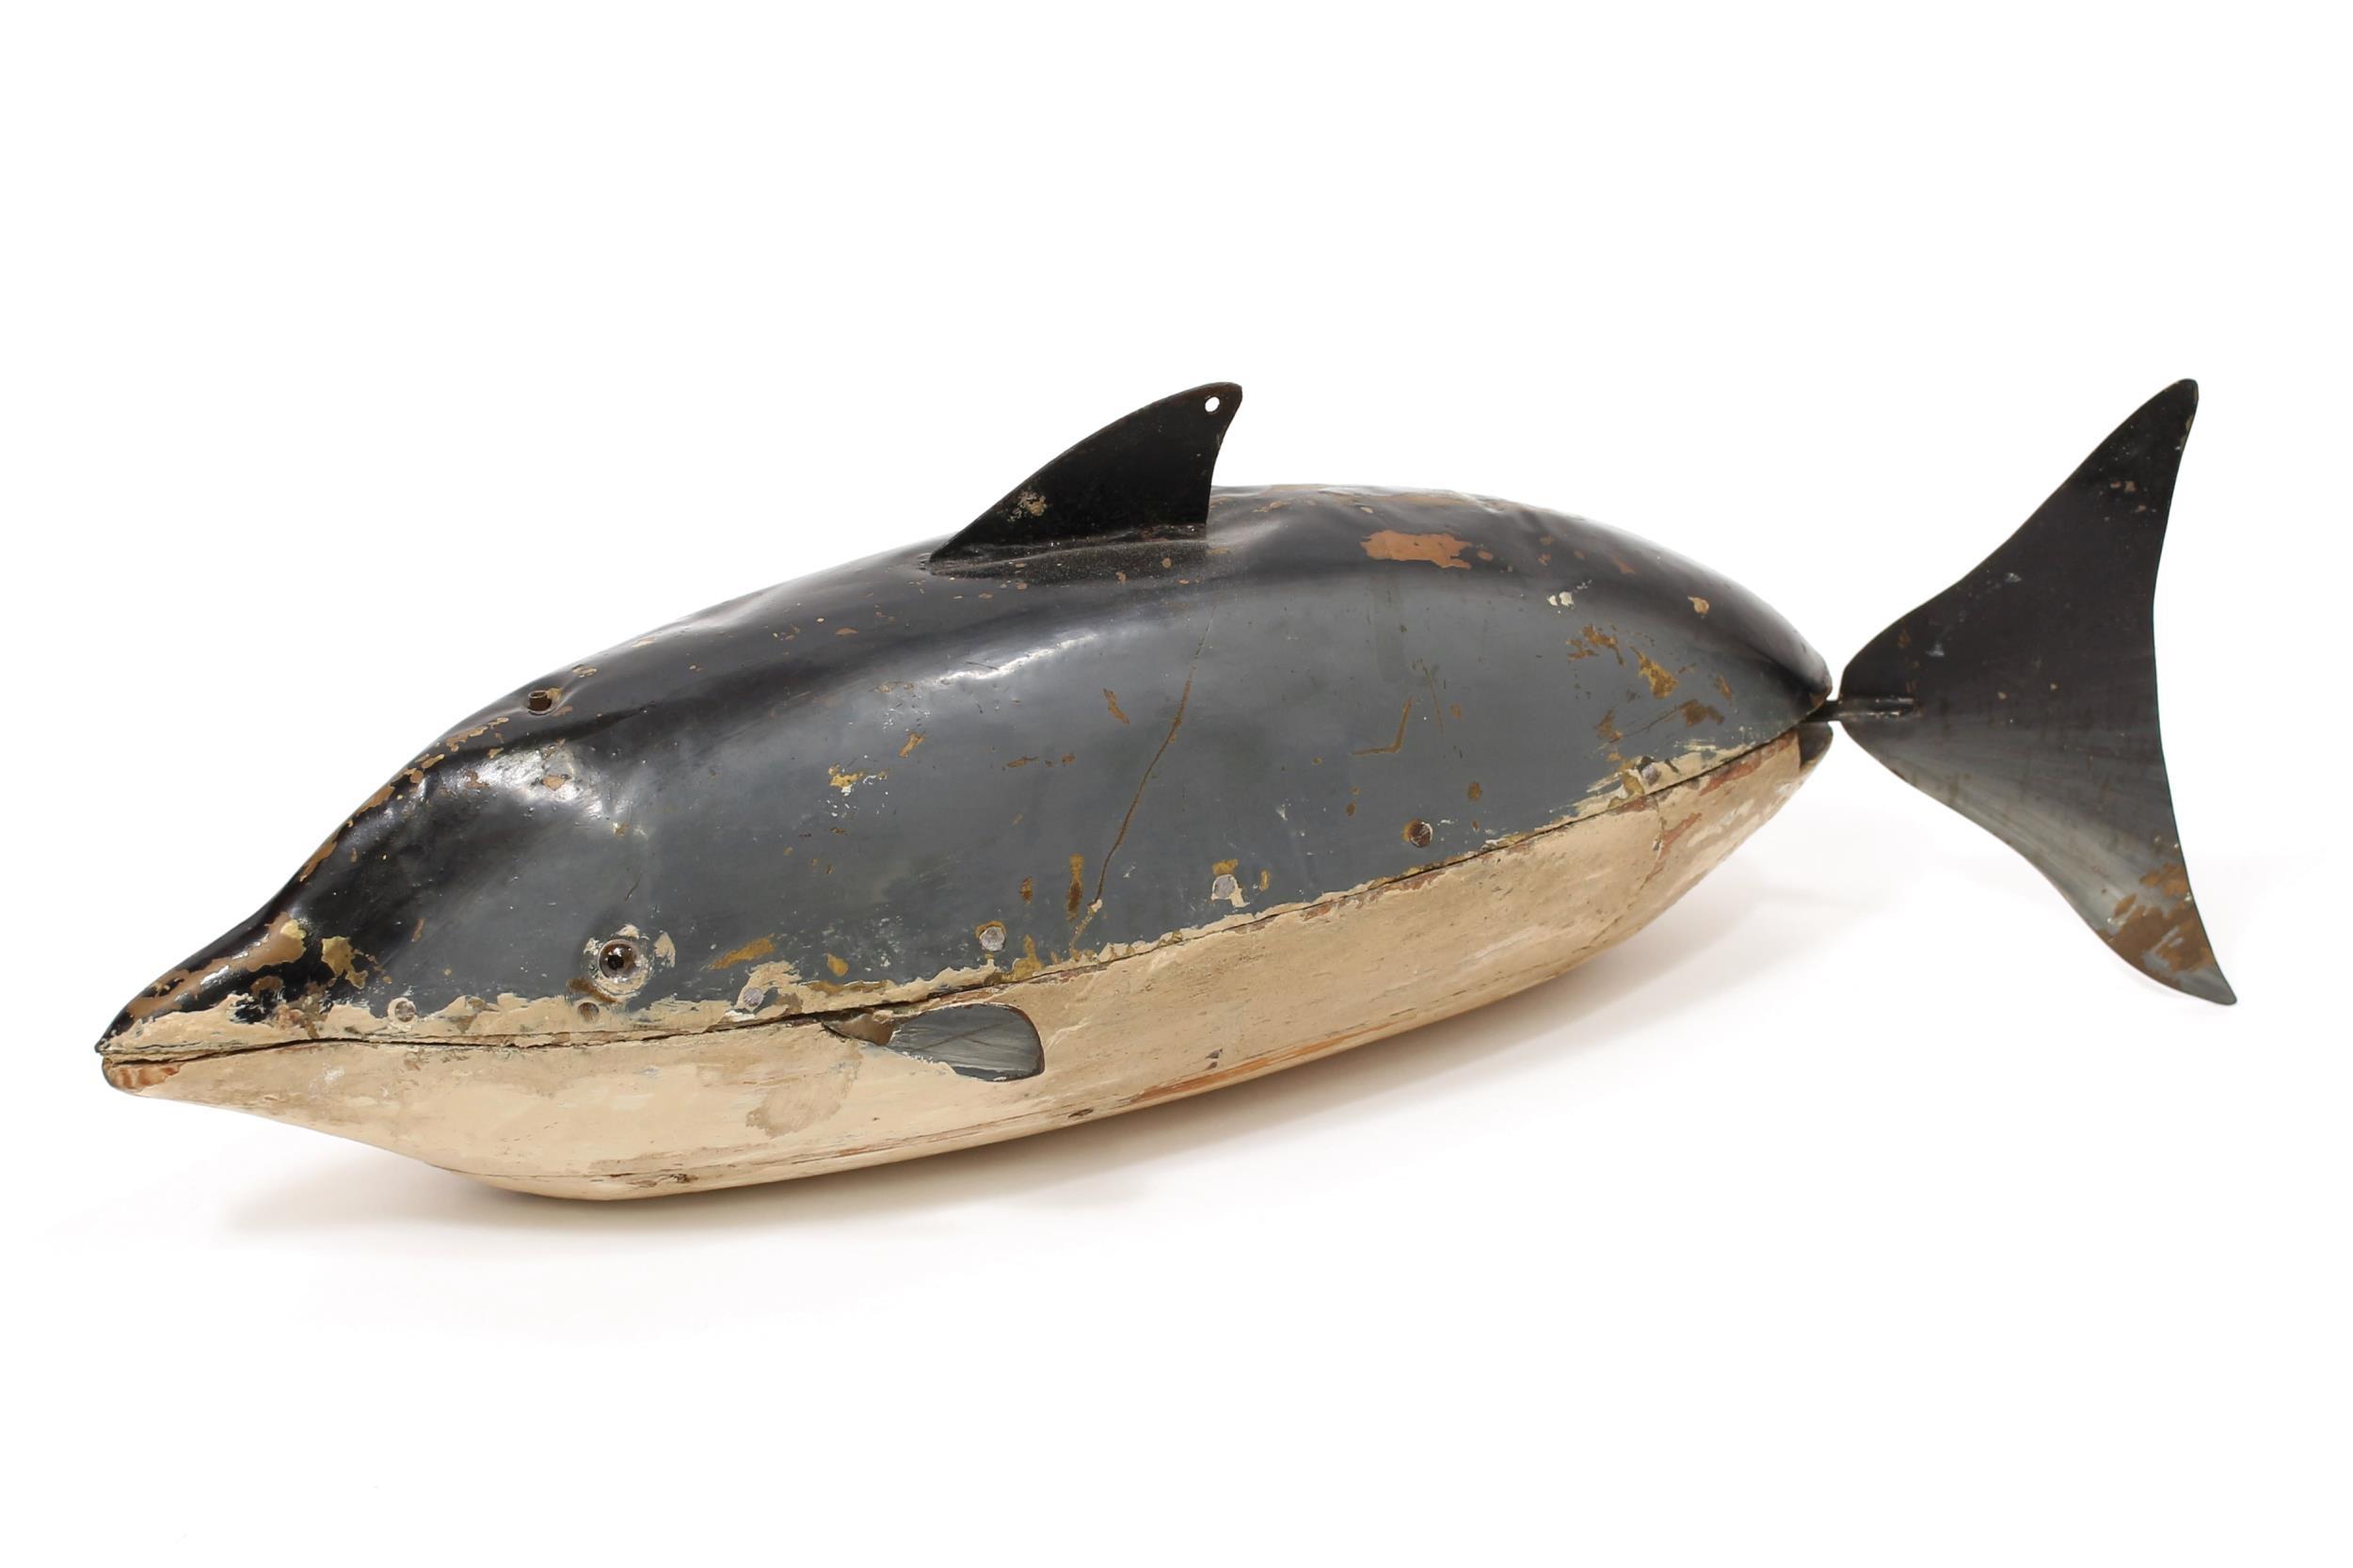 Folk Art & Automata - a rare early 20th century swimming automaton toy, in the form of a Porpoise, - Image 2 of 6